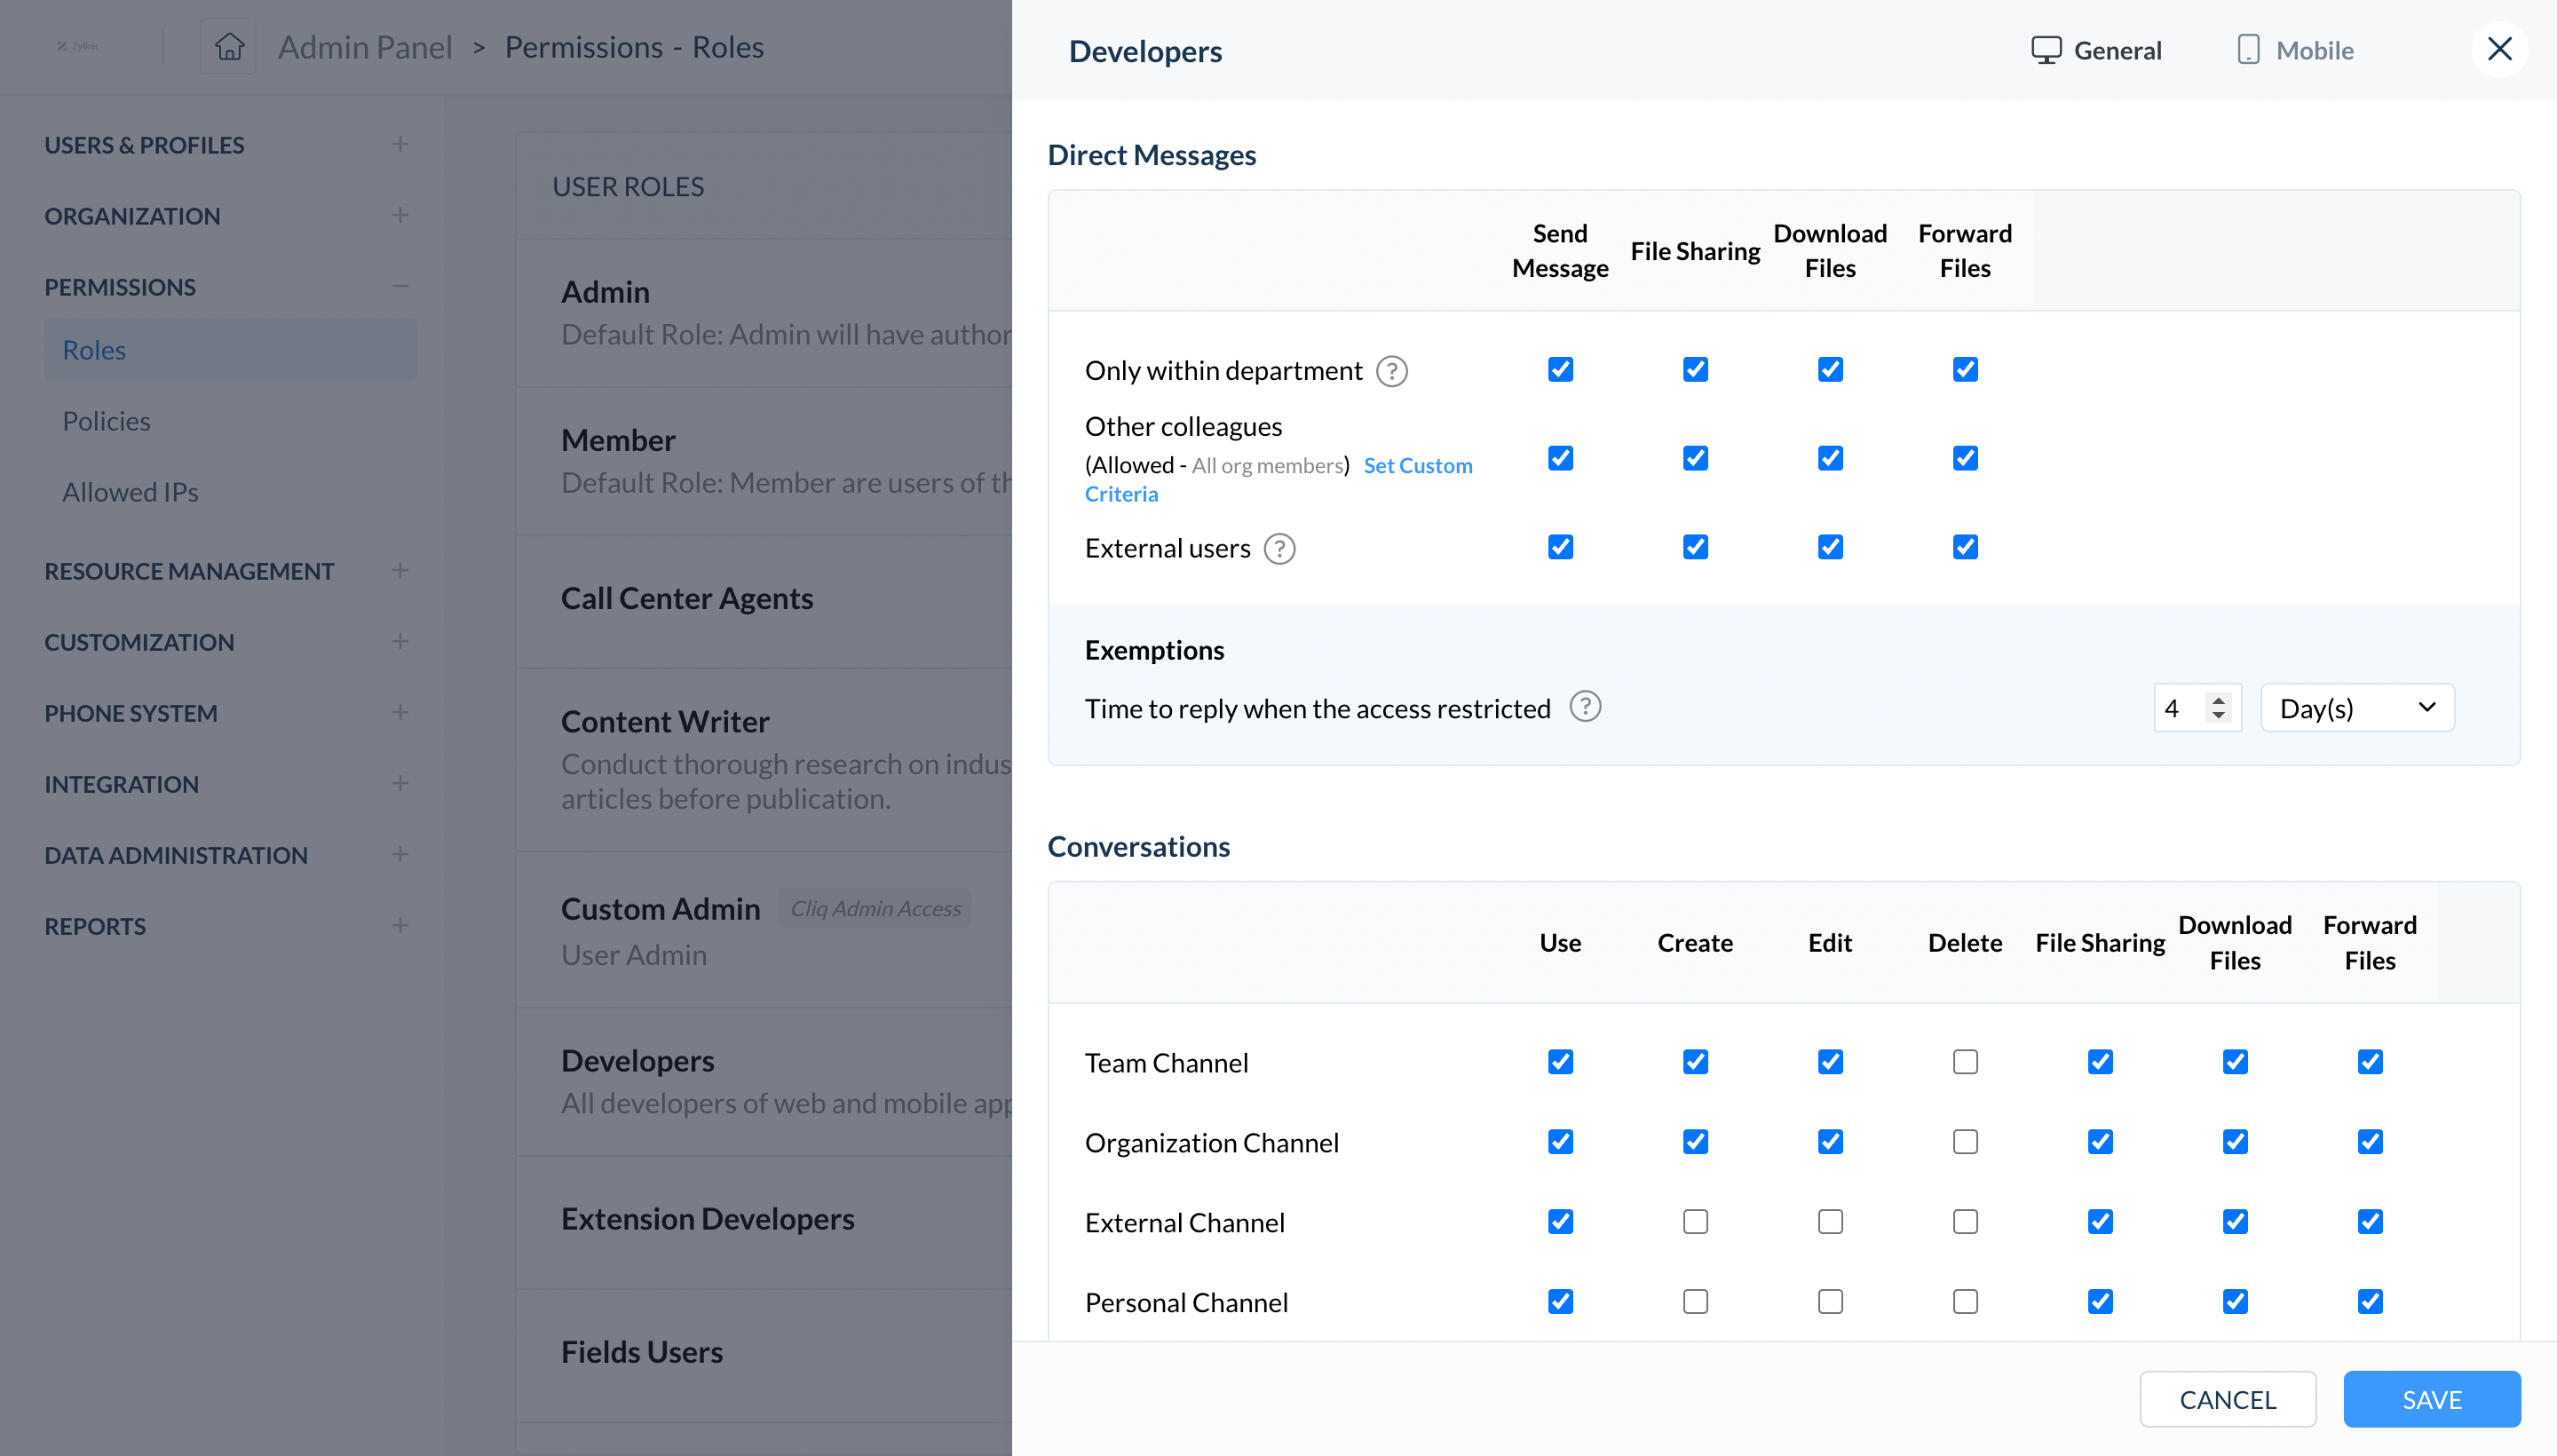 Permissions based on user roles